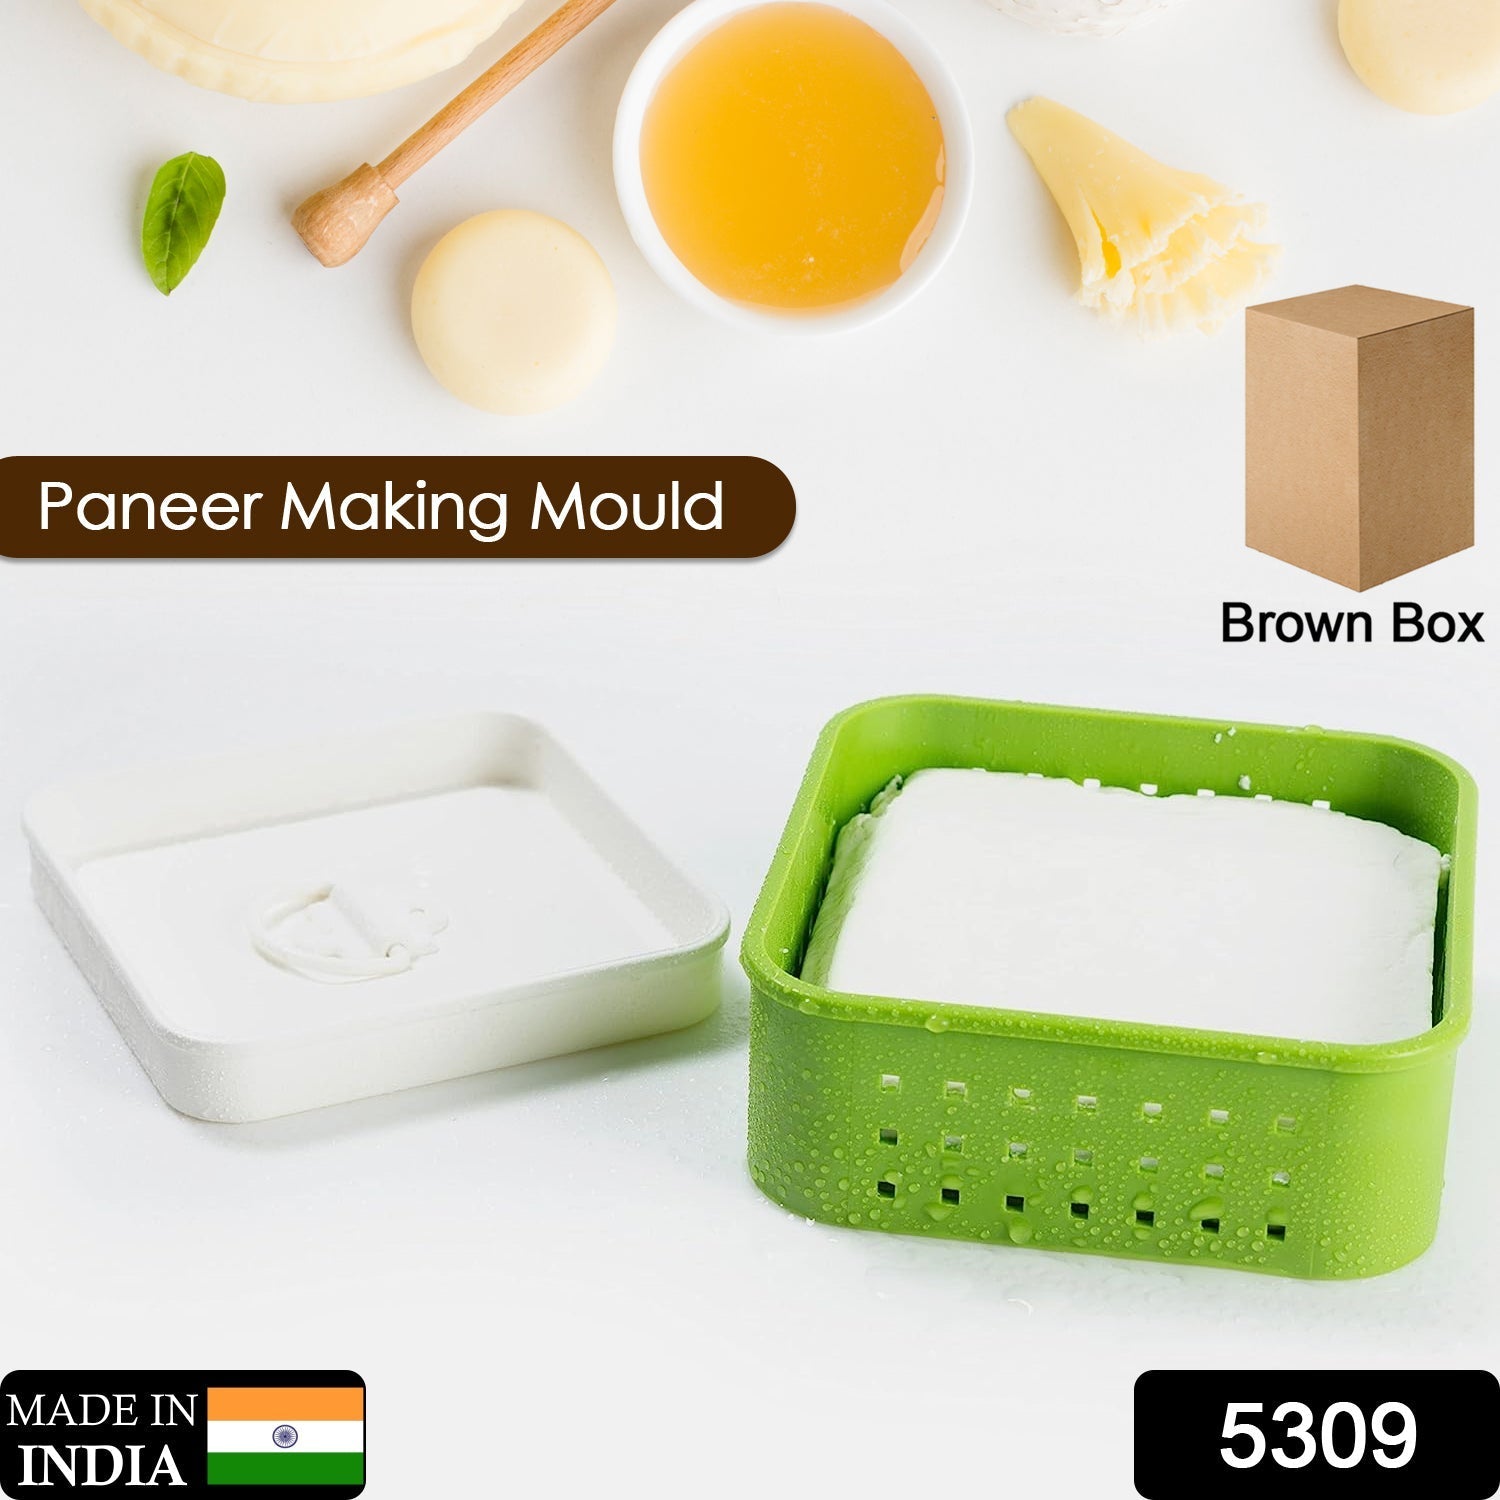 5309 Square Shape Paneer Maker, Paneer Mould, Tofu, Sprouts Mould Press Maker, Plastic Paneer Making Mould, Paneer Maker with Lid DeoDap